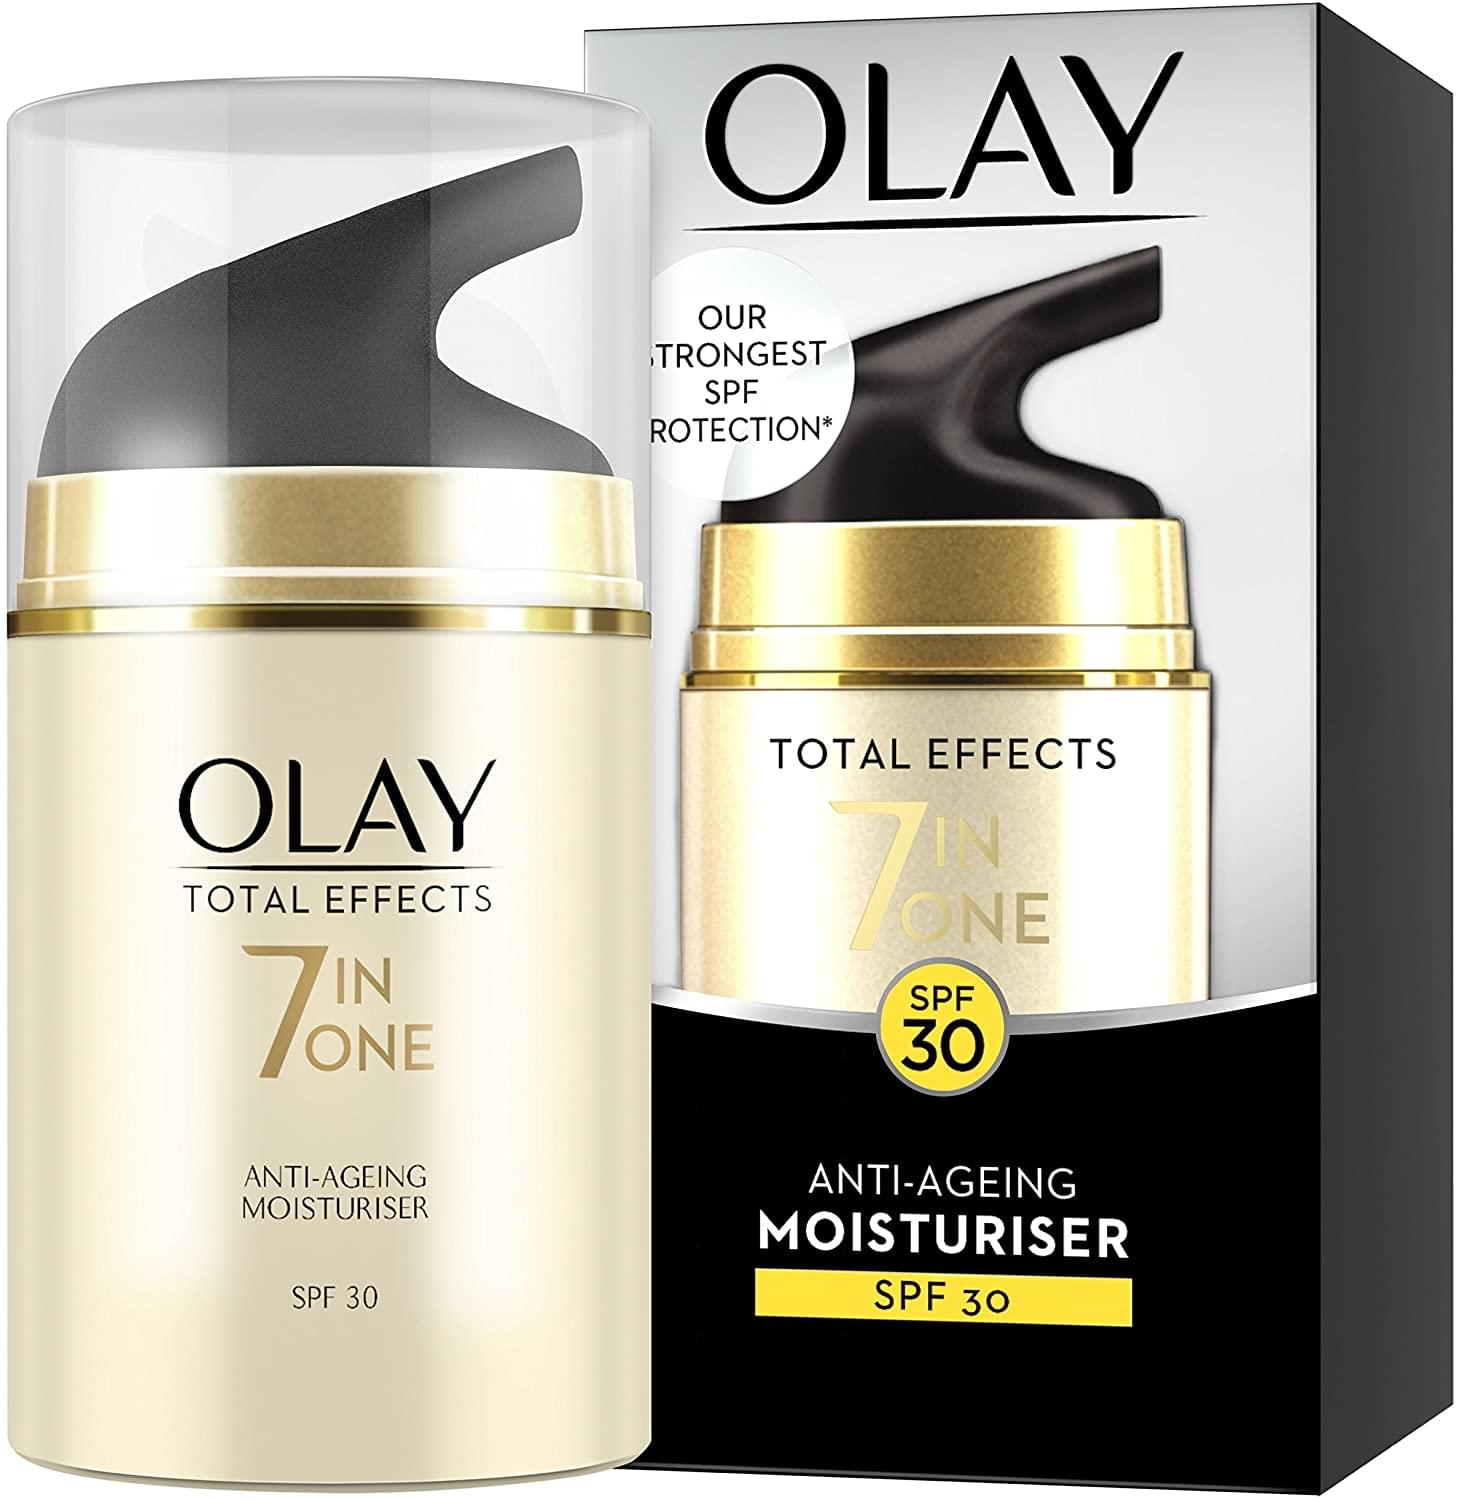 Olay - Total Effects SPF30 7in1 Anti-Ageing Moisturiser